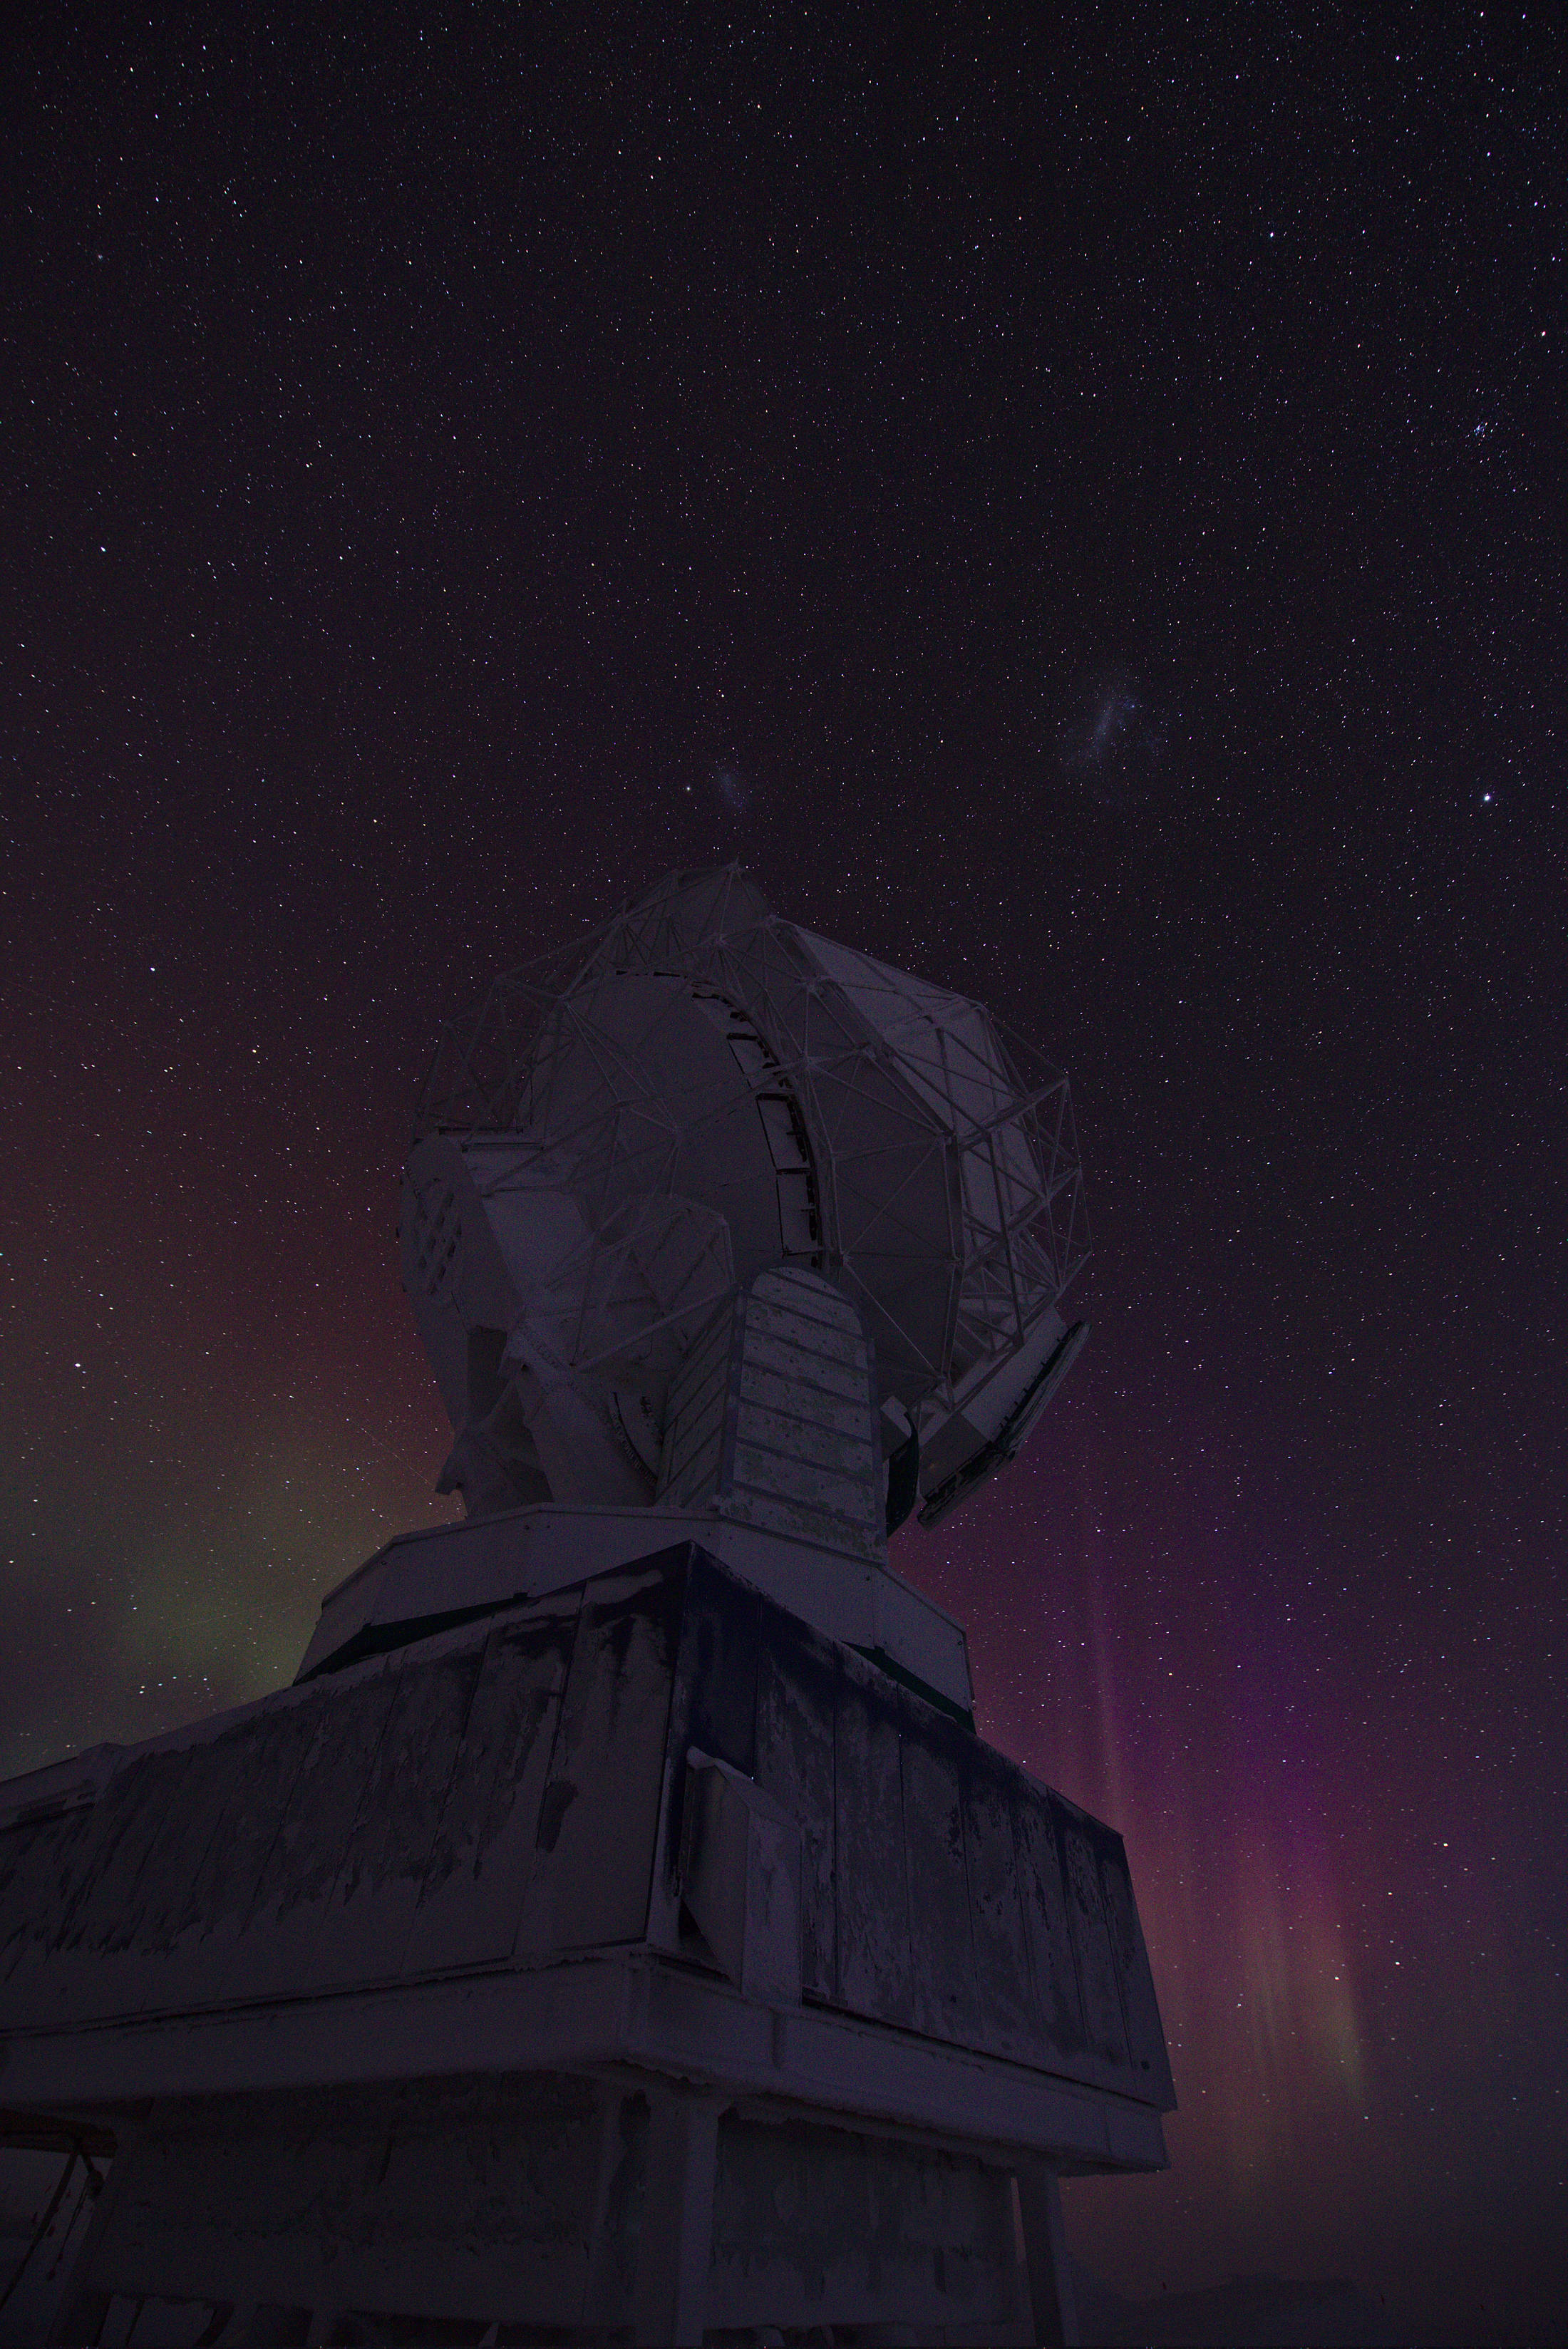 South Pole Telescope from below, with auroras on the horizon and the Magellanic Clouds above the telescope